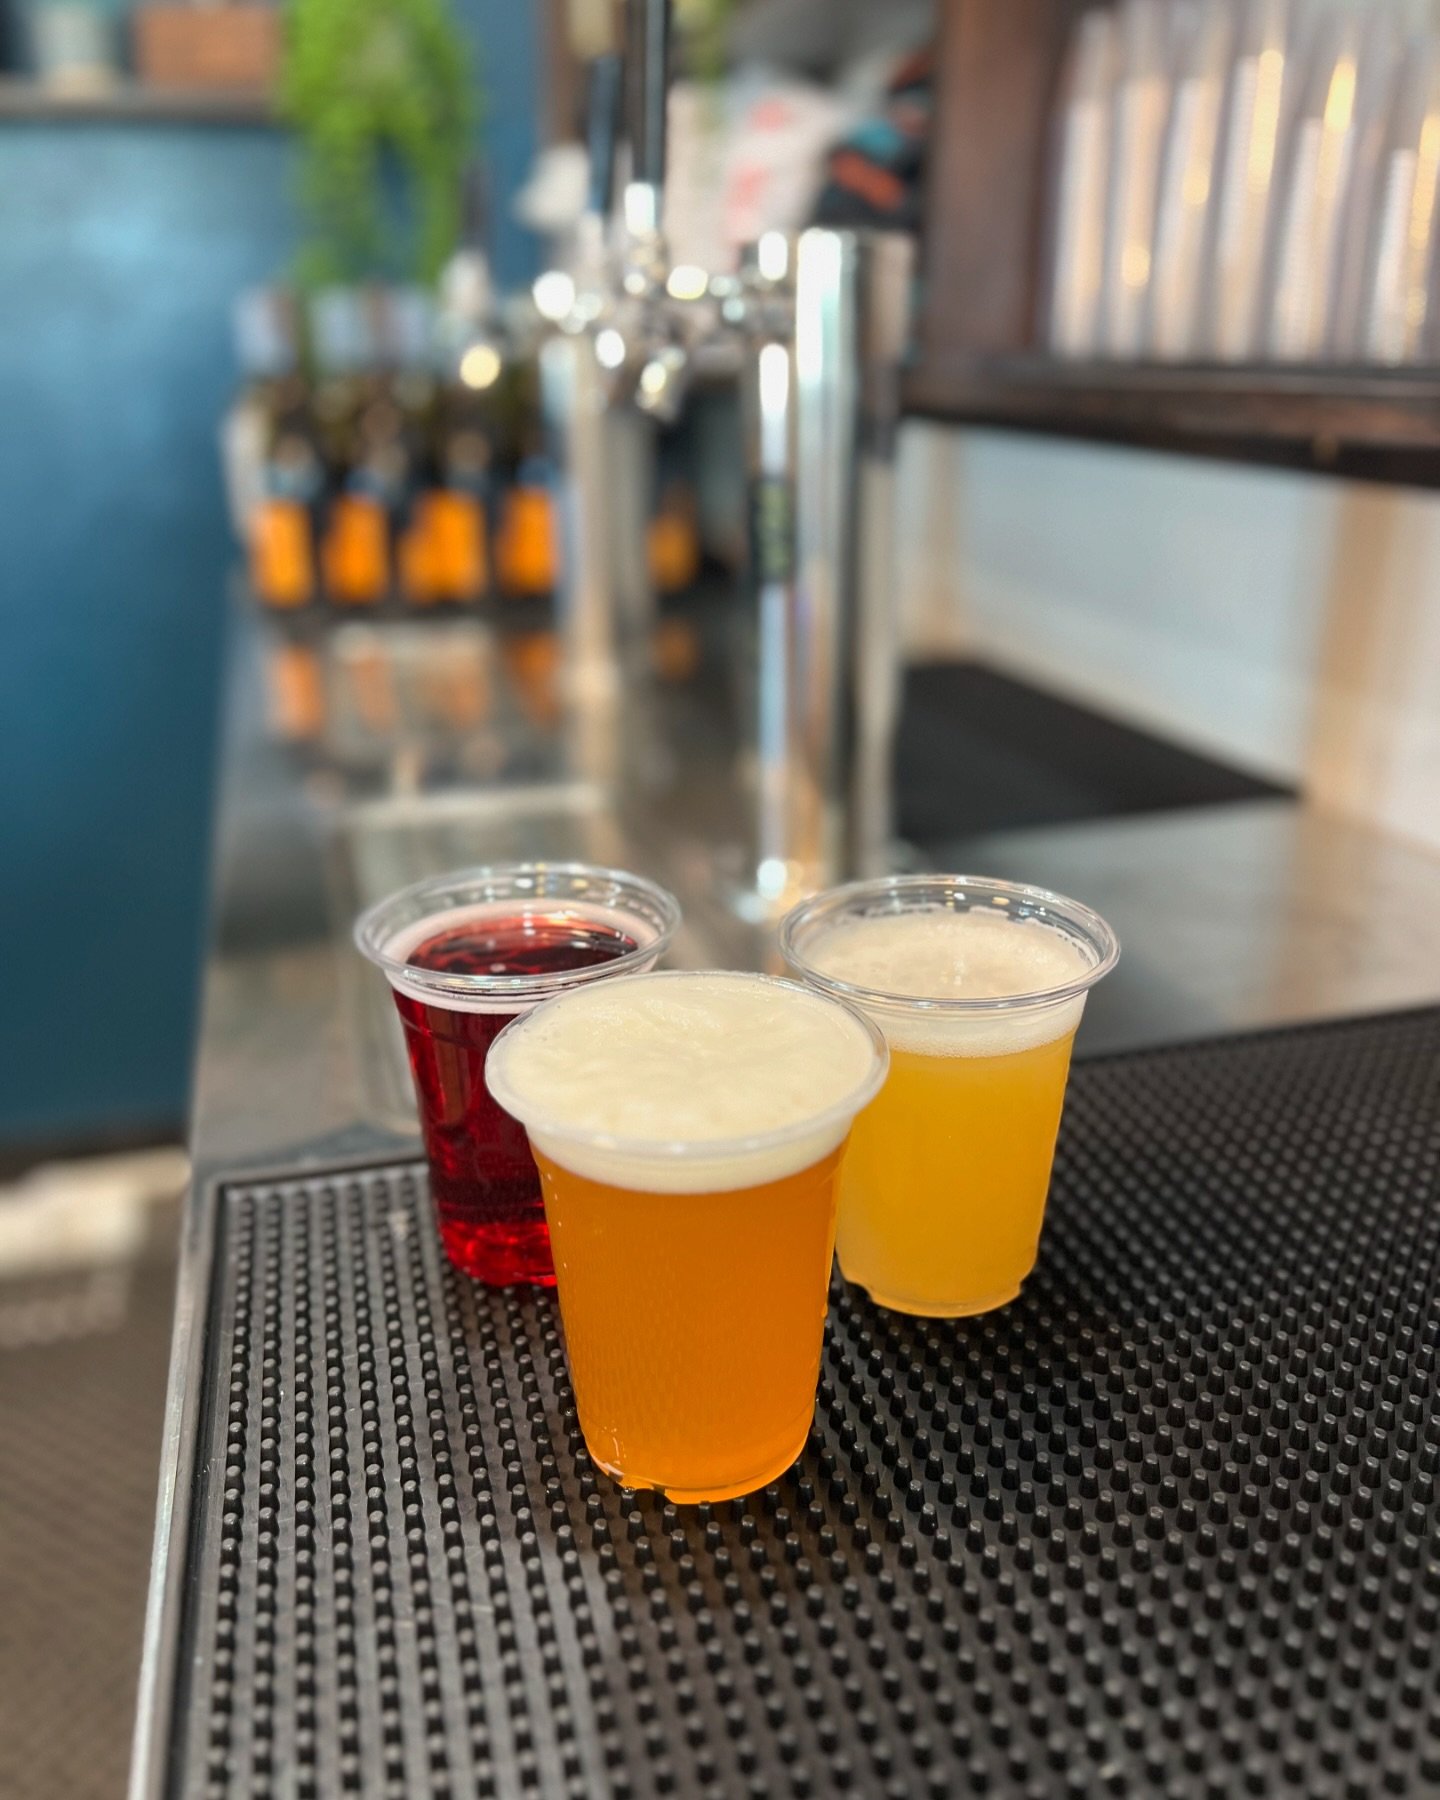 Come enjoy your Friday night with us!! We have some new beers on tap and  good eats! Our food trucks tonight are Bird Box, Culinary Mafia @thomm_yumm_thai and @bigjakesdogs 

#craftbeer #foodtrucks #taphouse #foodpark #casagrandeaz #arizona #cider #o